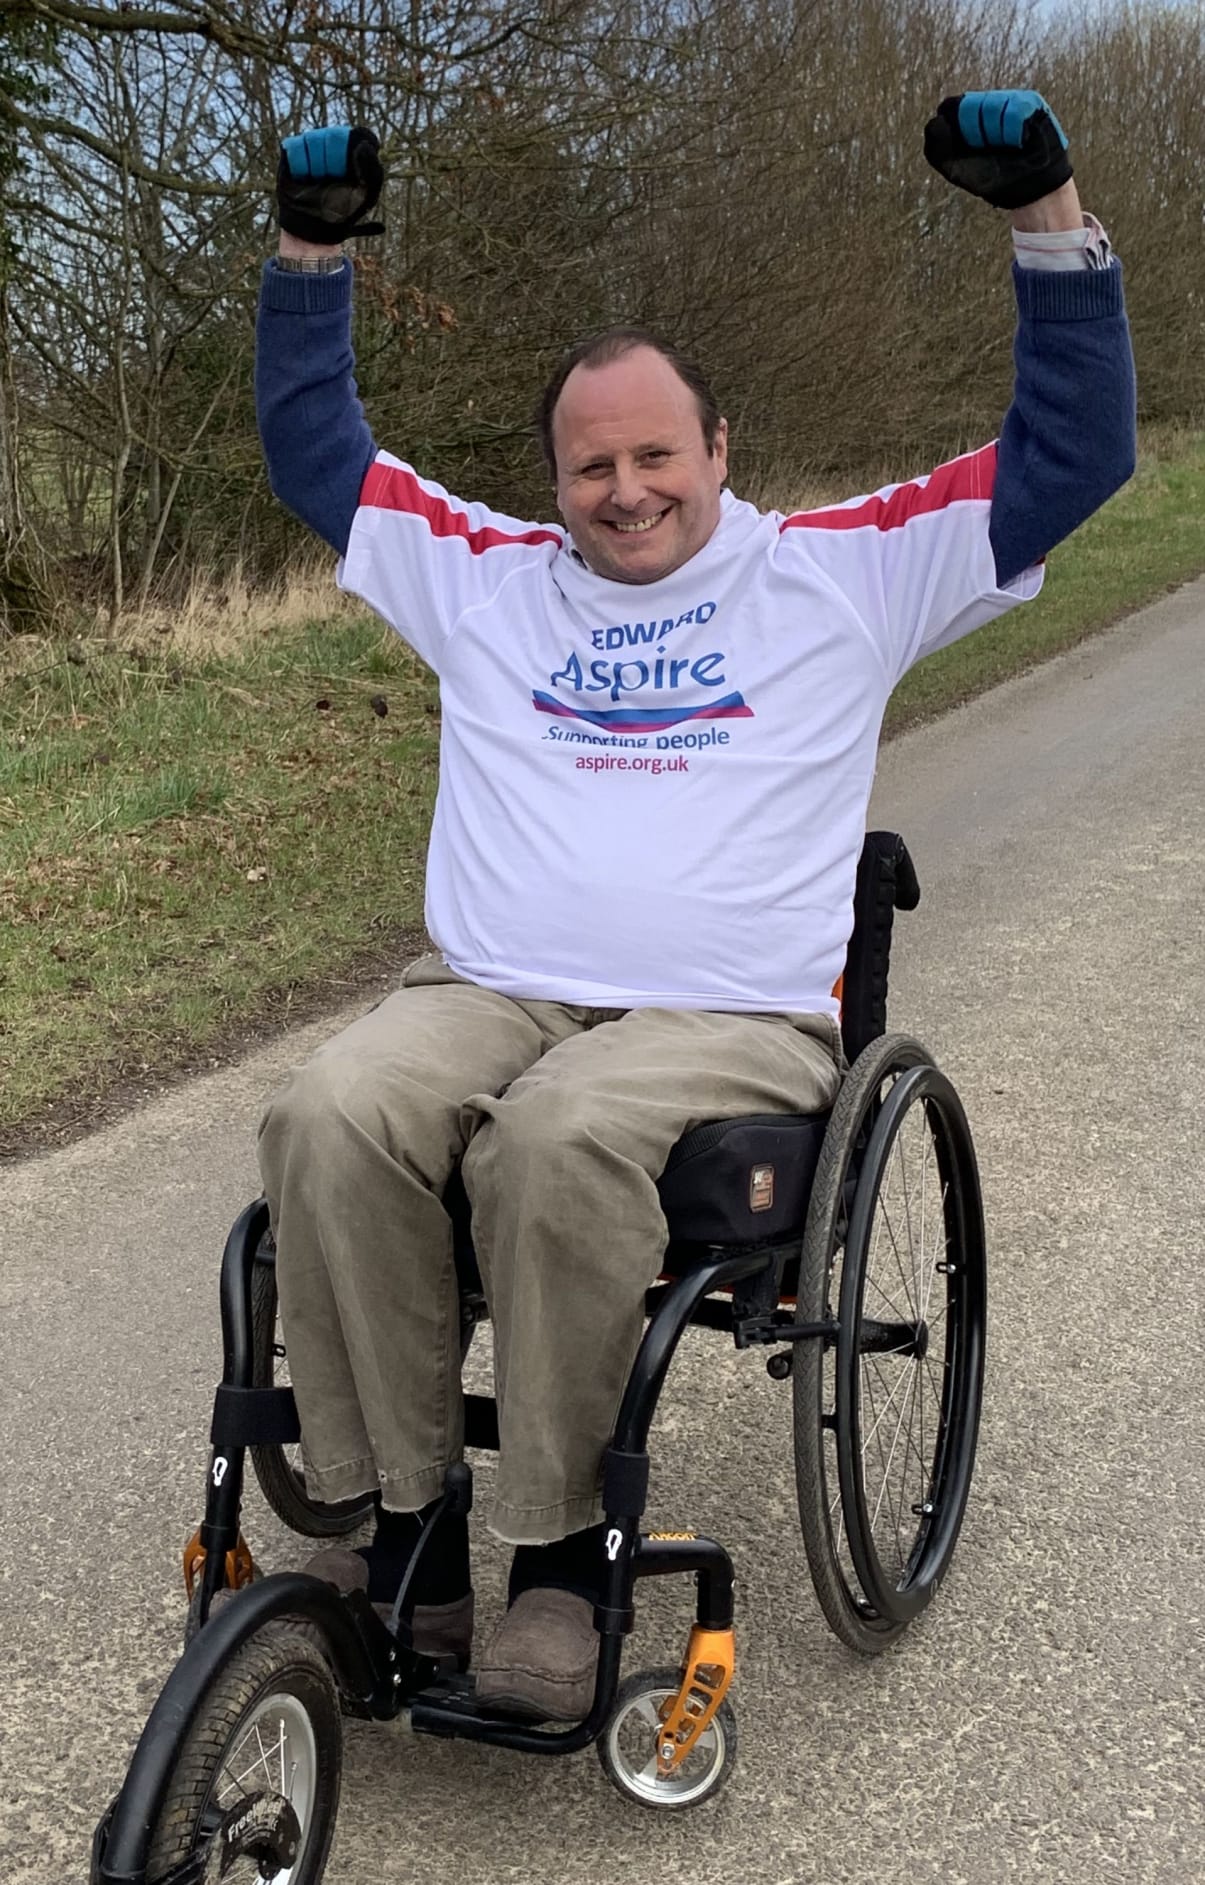 Edward in his Aspire t-shirt in his wheelchair